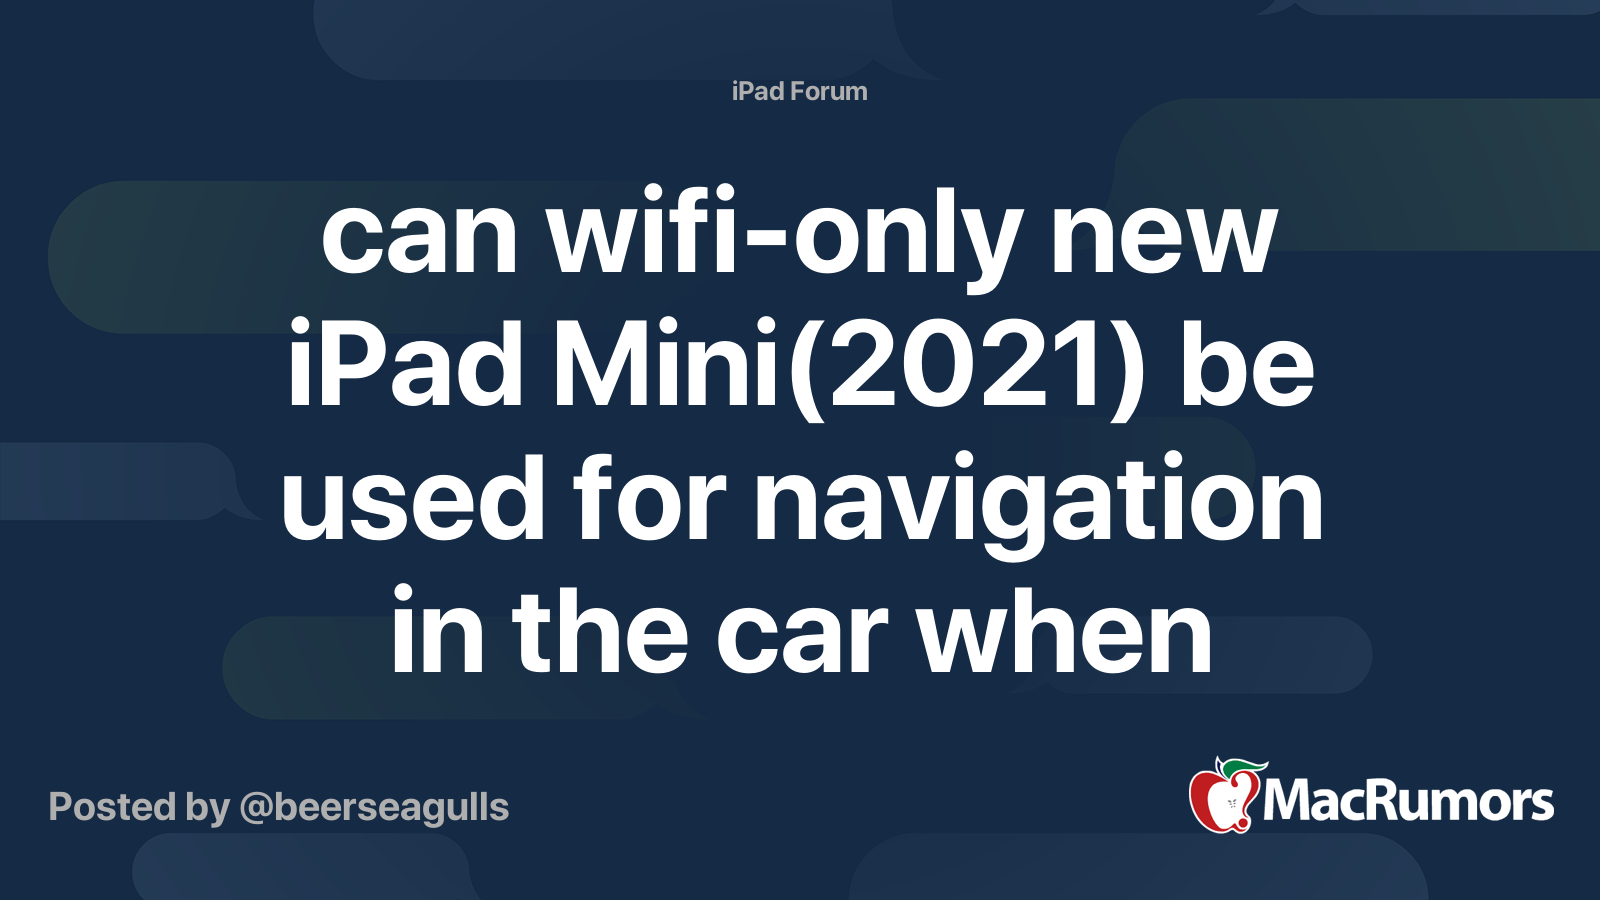 can wifi-only new iPad be used for navigation in the car when tethered to an iPhone?(using Apple Maps or Google Maps) | MacRumors Forums